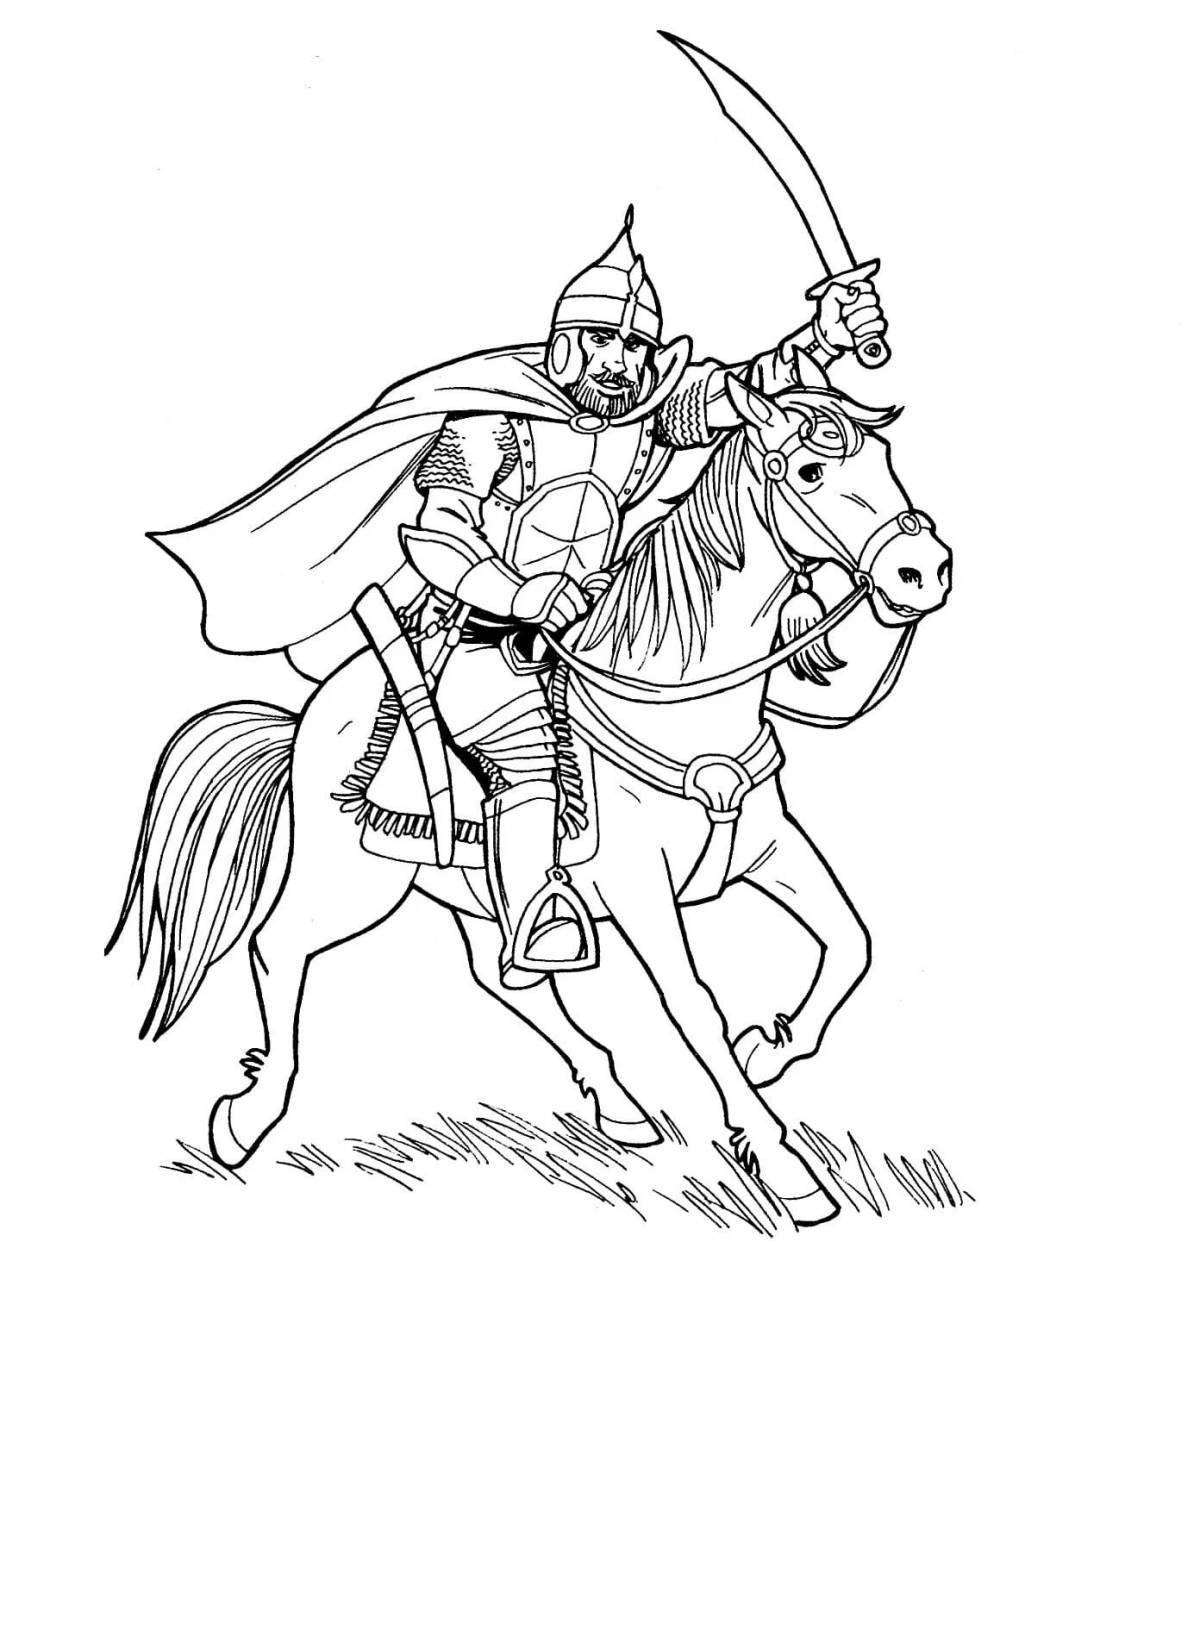 The valiant hero of the coloring book on horseback